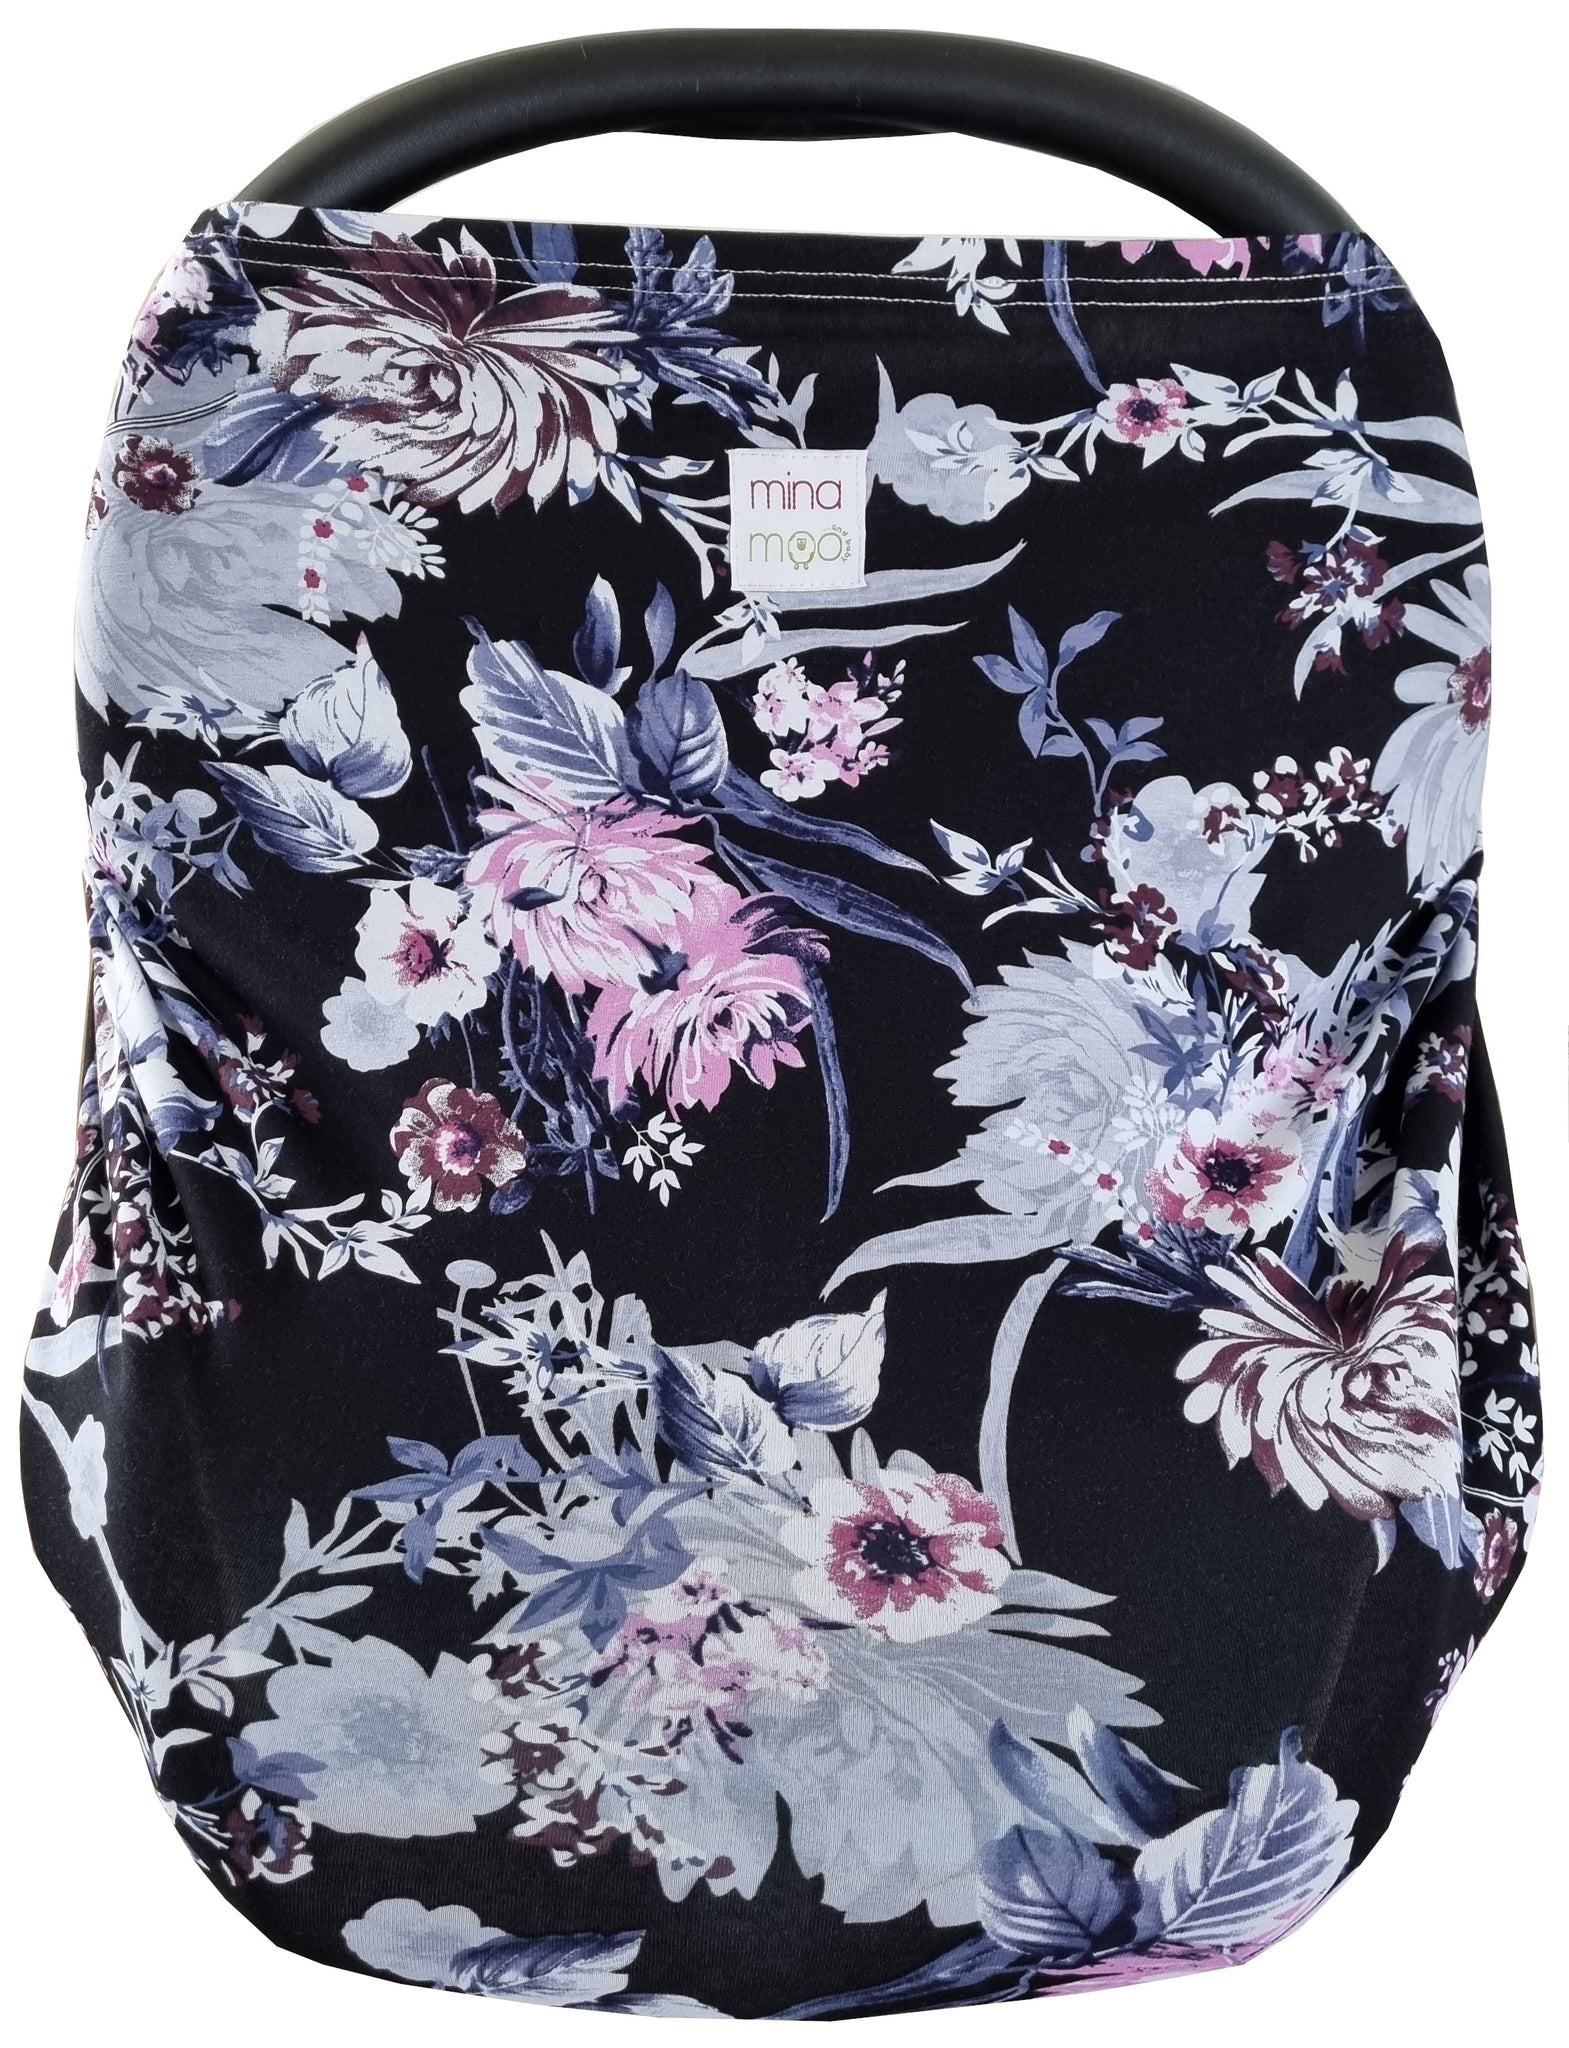 Midnight bloom fitted infant car seat cover